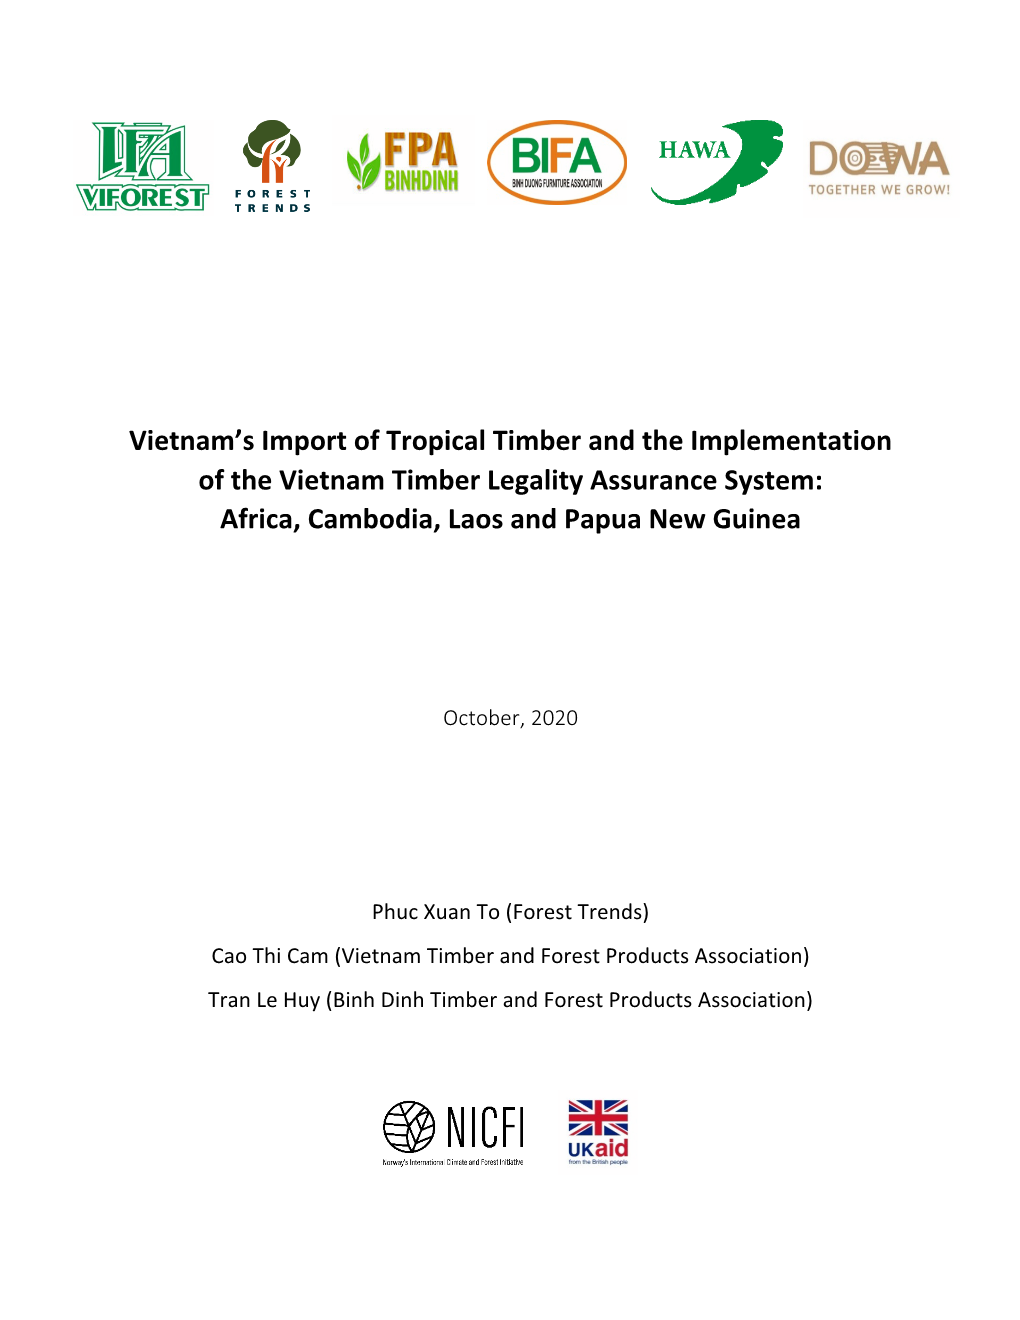 Vietnam's Import of Tropical Timber and The